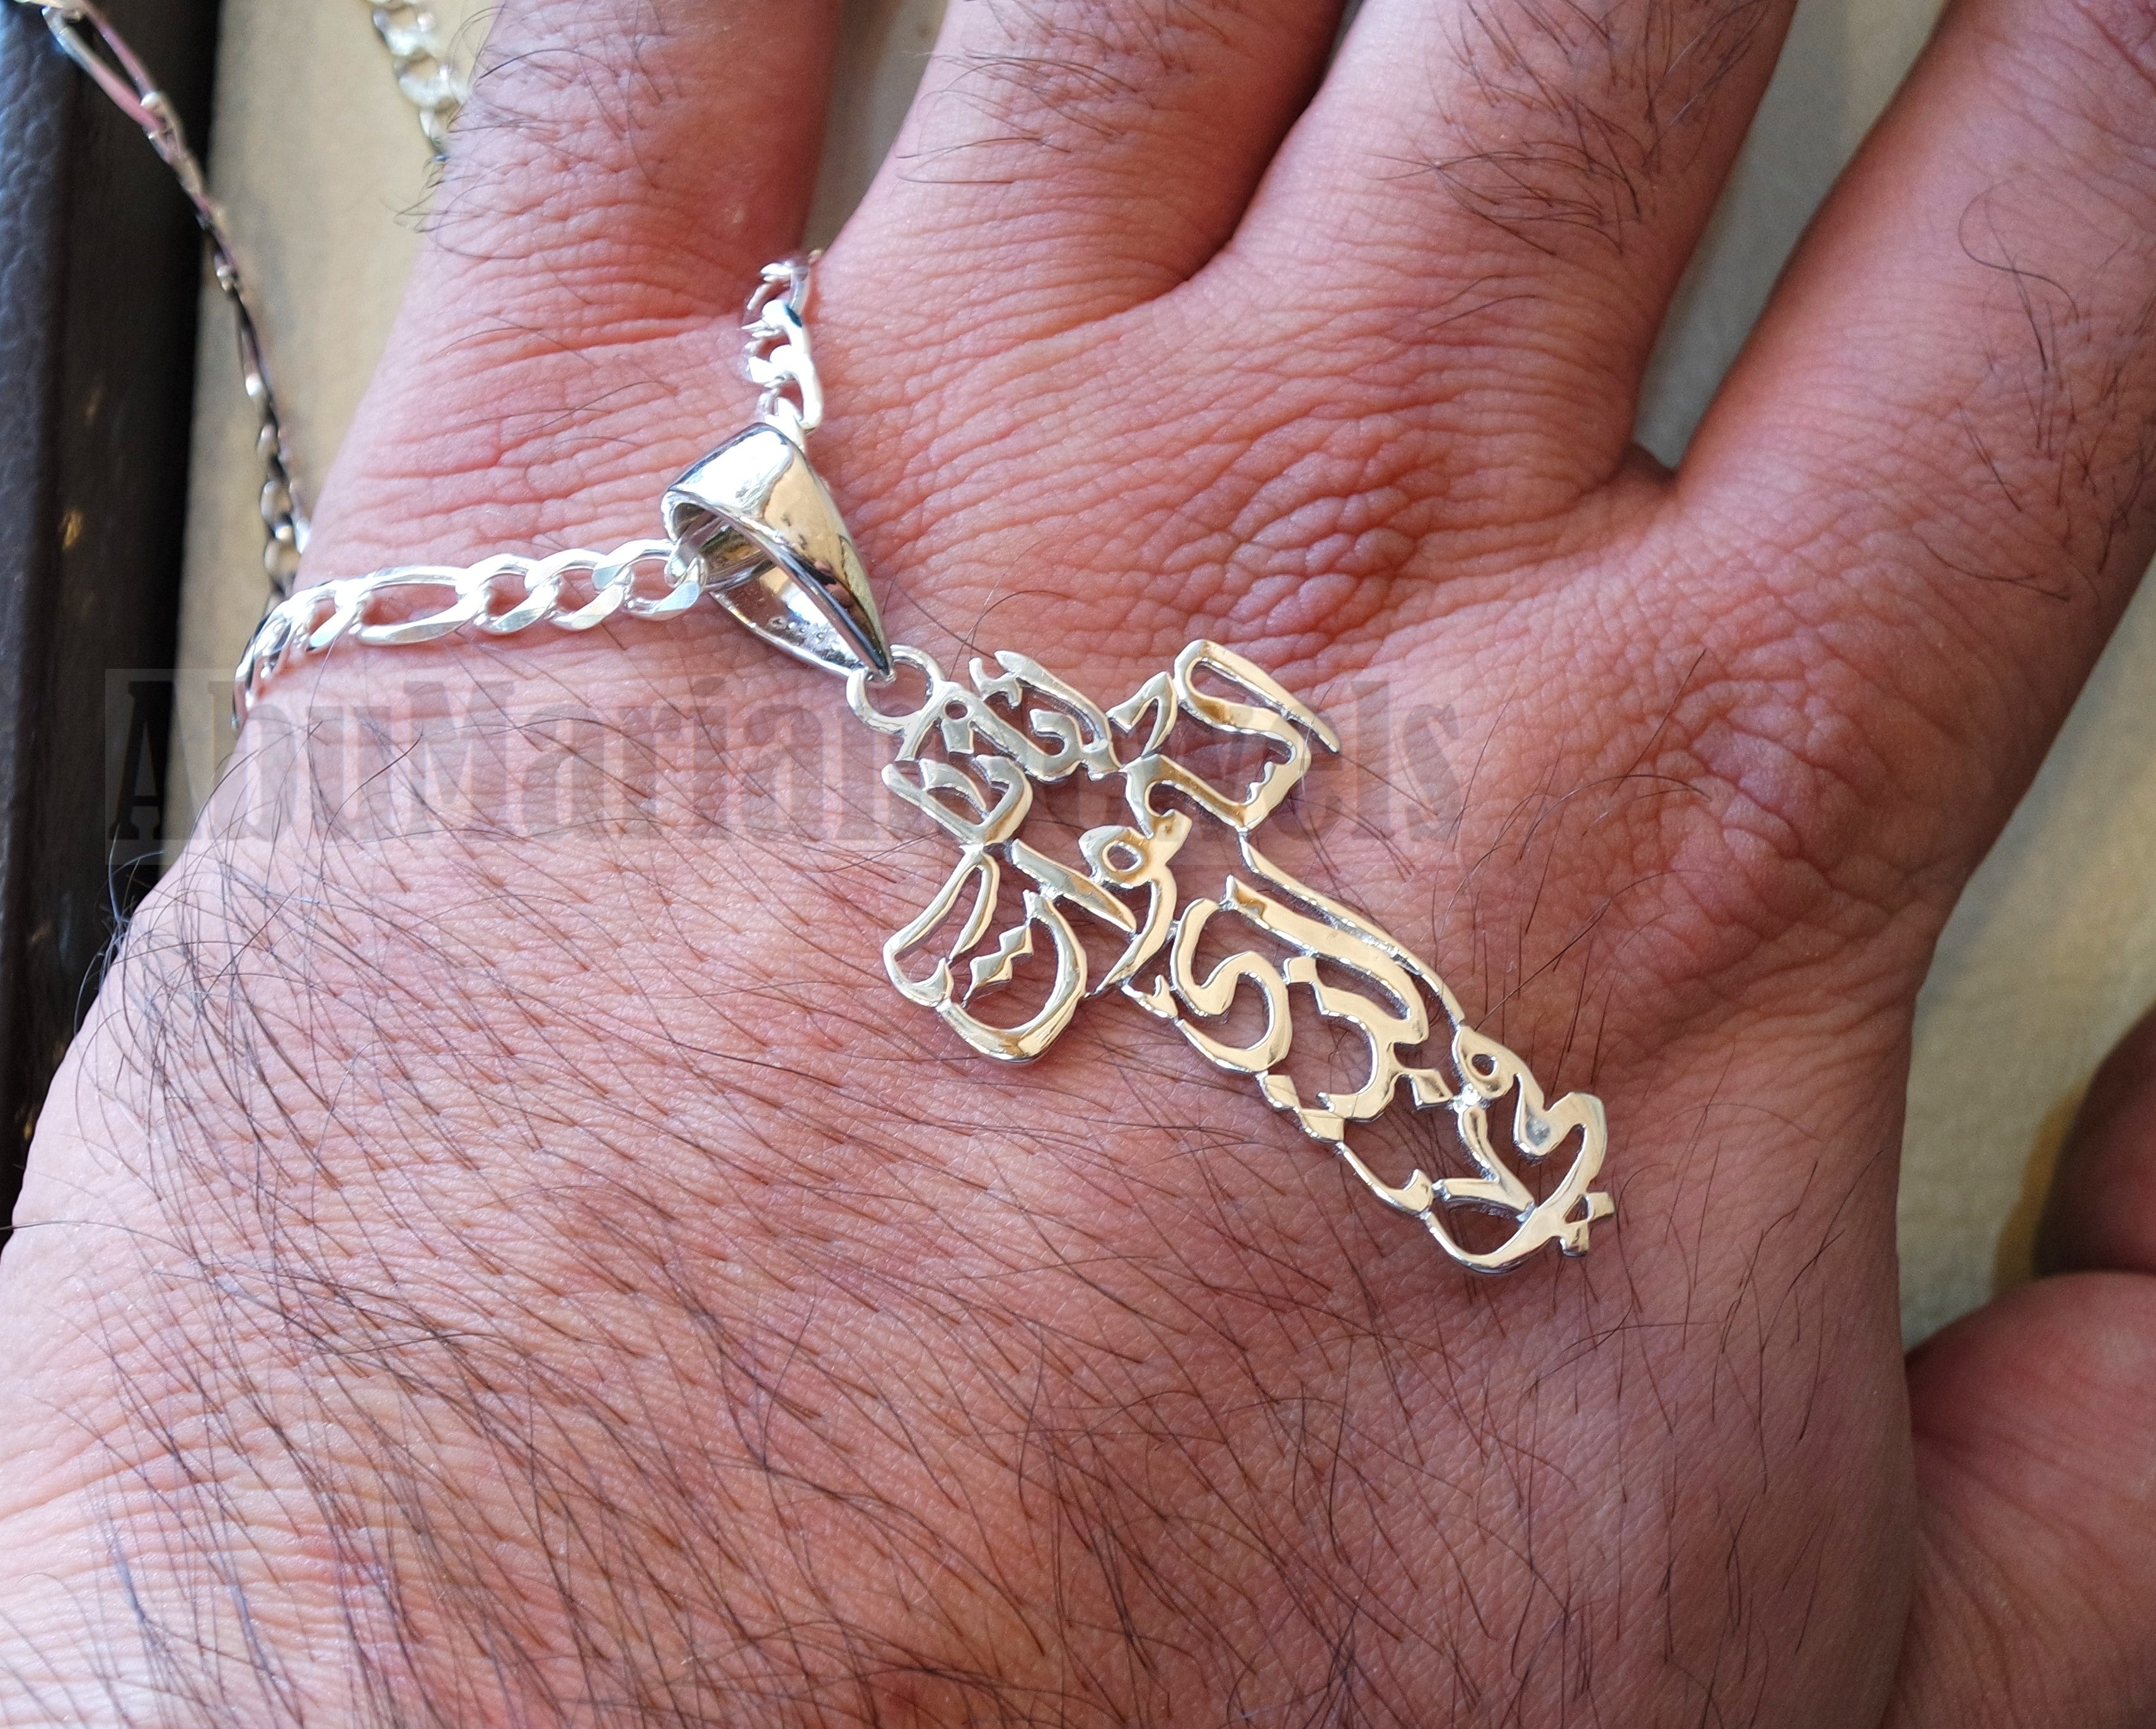 Arabic calligraphy cross with thick chain our father who art in heaven pendant sterling silver 925 catholic orthodox christianity handmade fast shipping